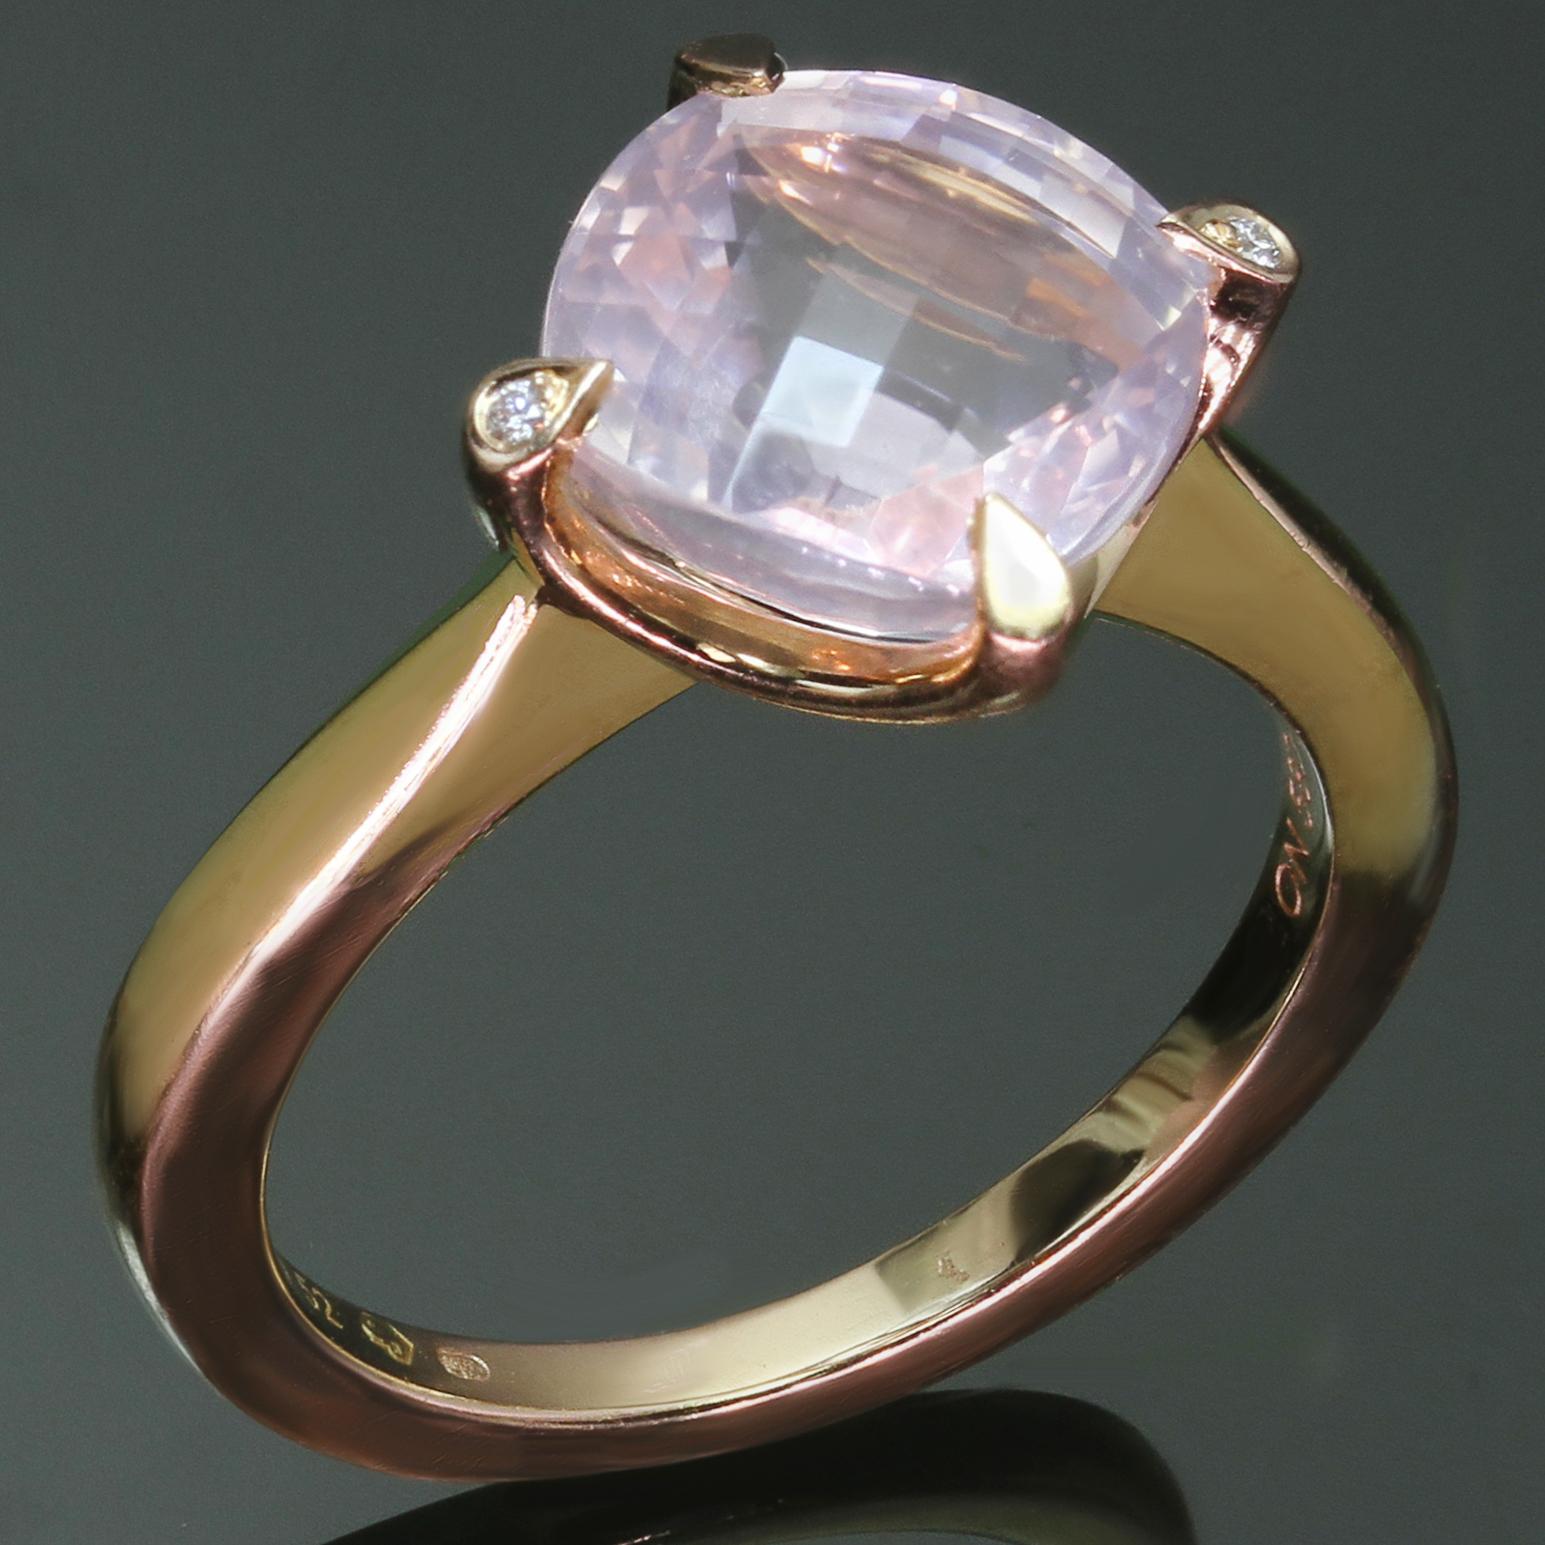 This fabulous ring from Cartier's elegant Mysterieuse collection is crafted in 18k rose gold and set with a faceted rose quartz and accented with a pair of brilliant-cut round D-E-F VVS1-VVS2 diamonds. Made in France circa 2010s. Measurements: 0.47